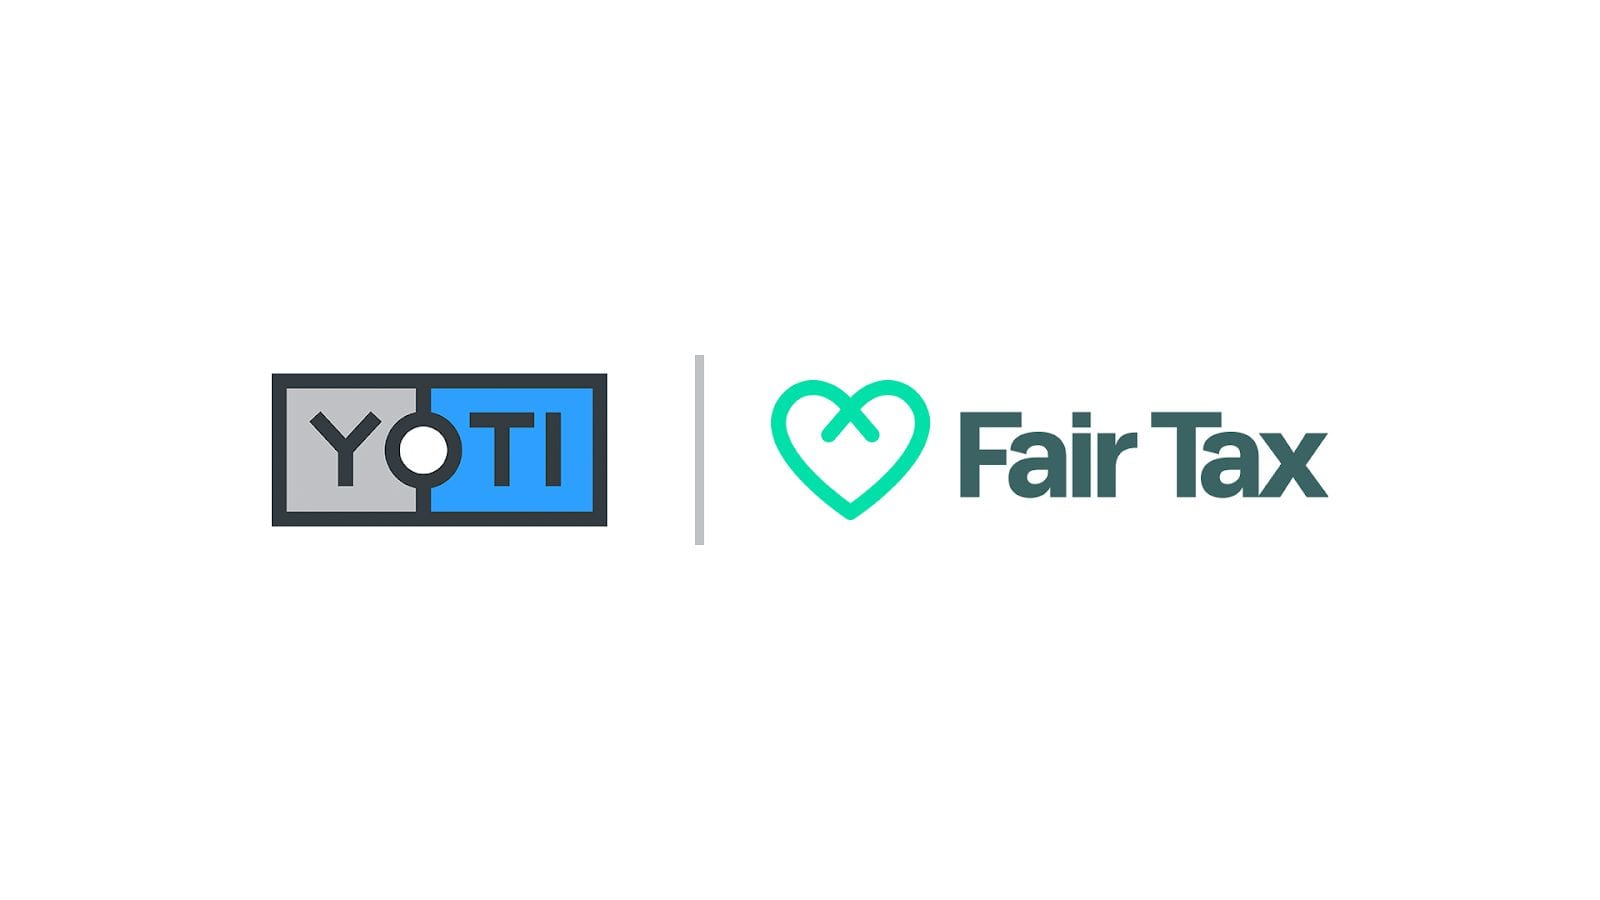 Yoti is proud to be an accredited Fair Tax Mark business